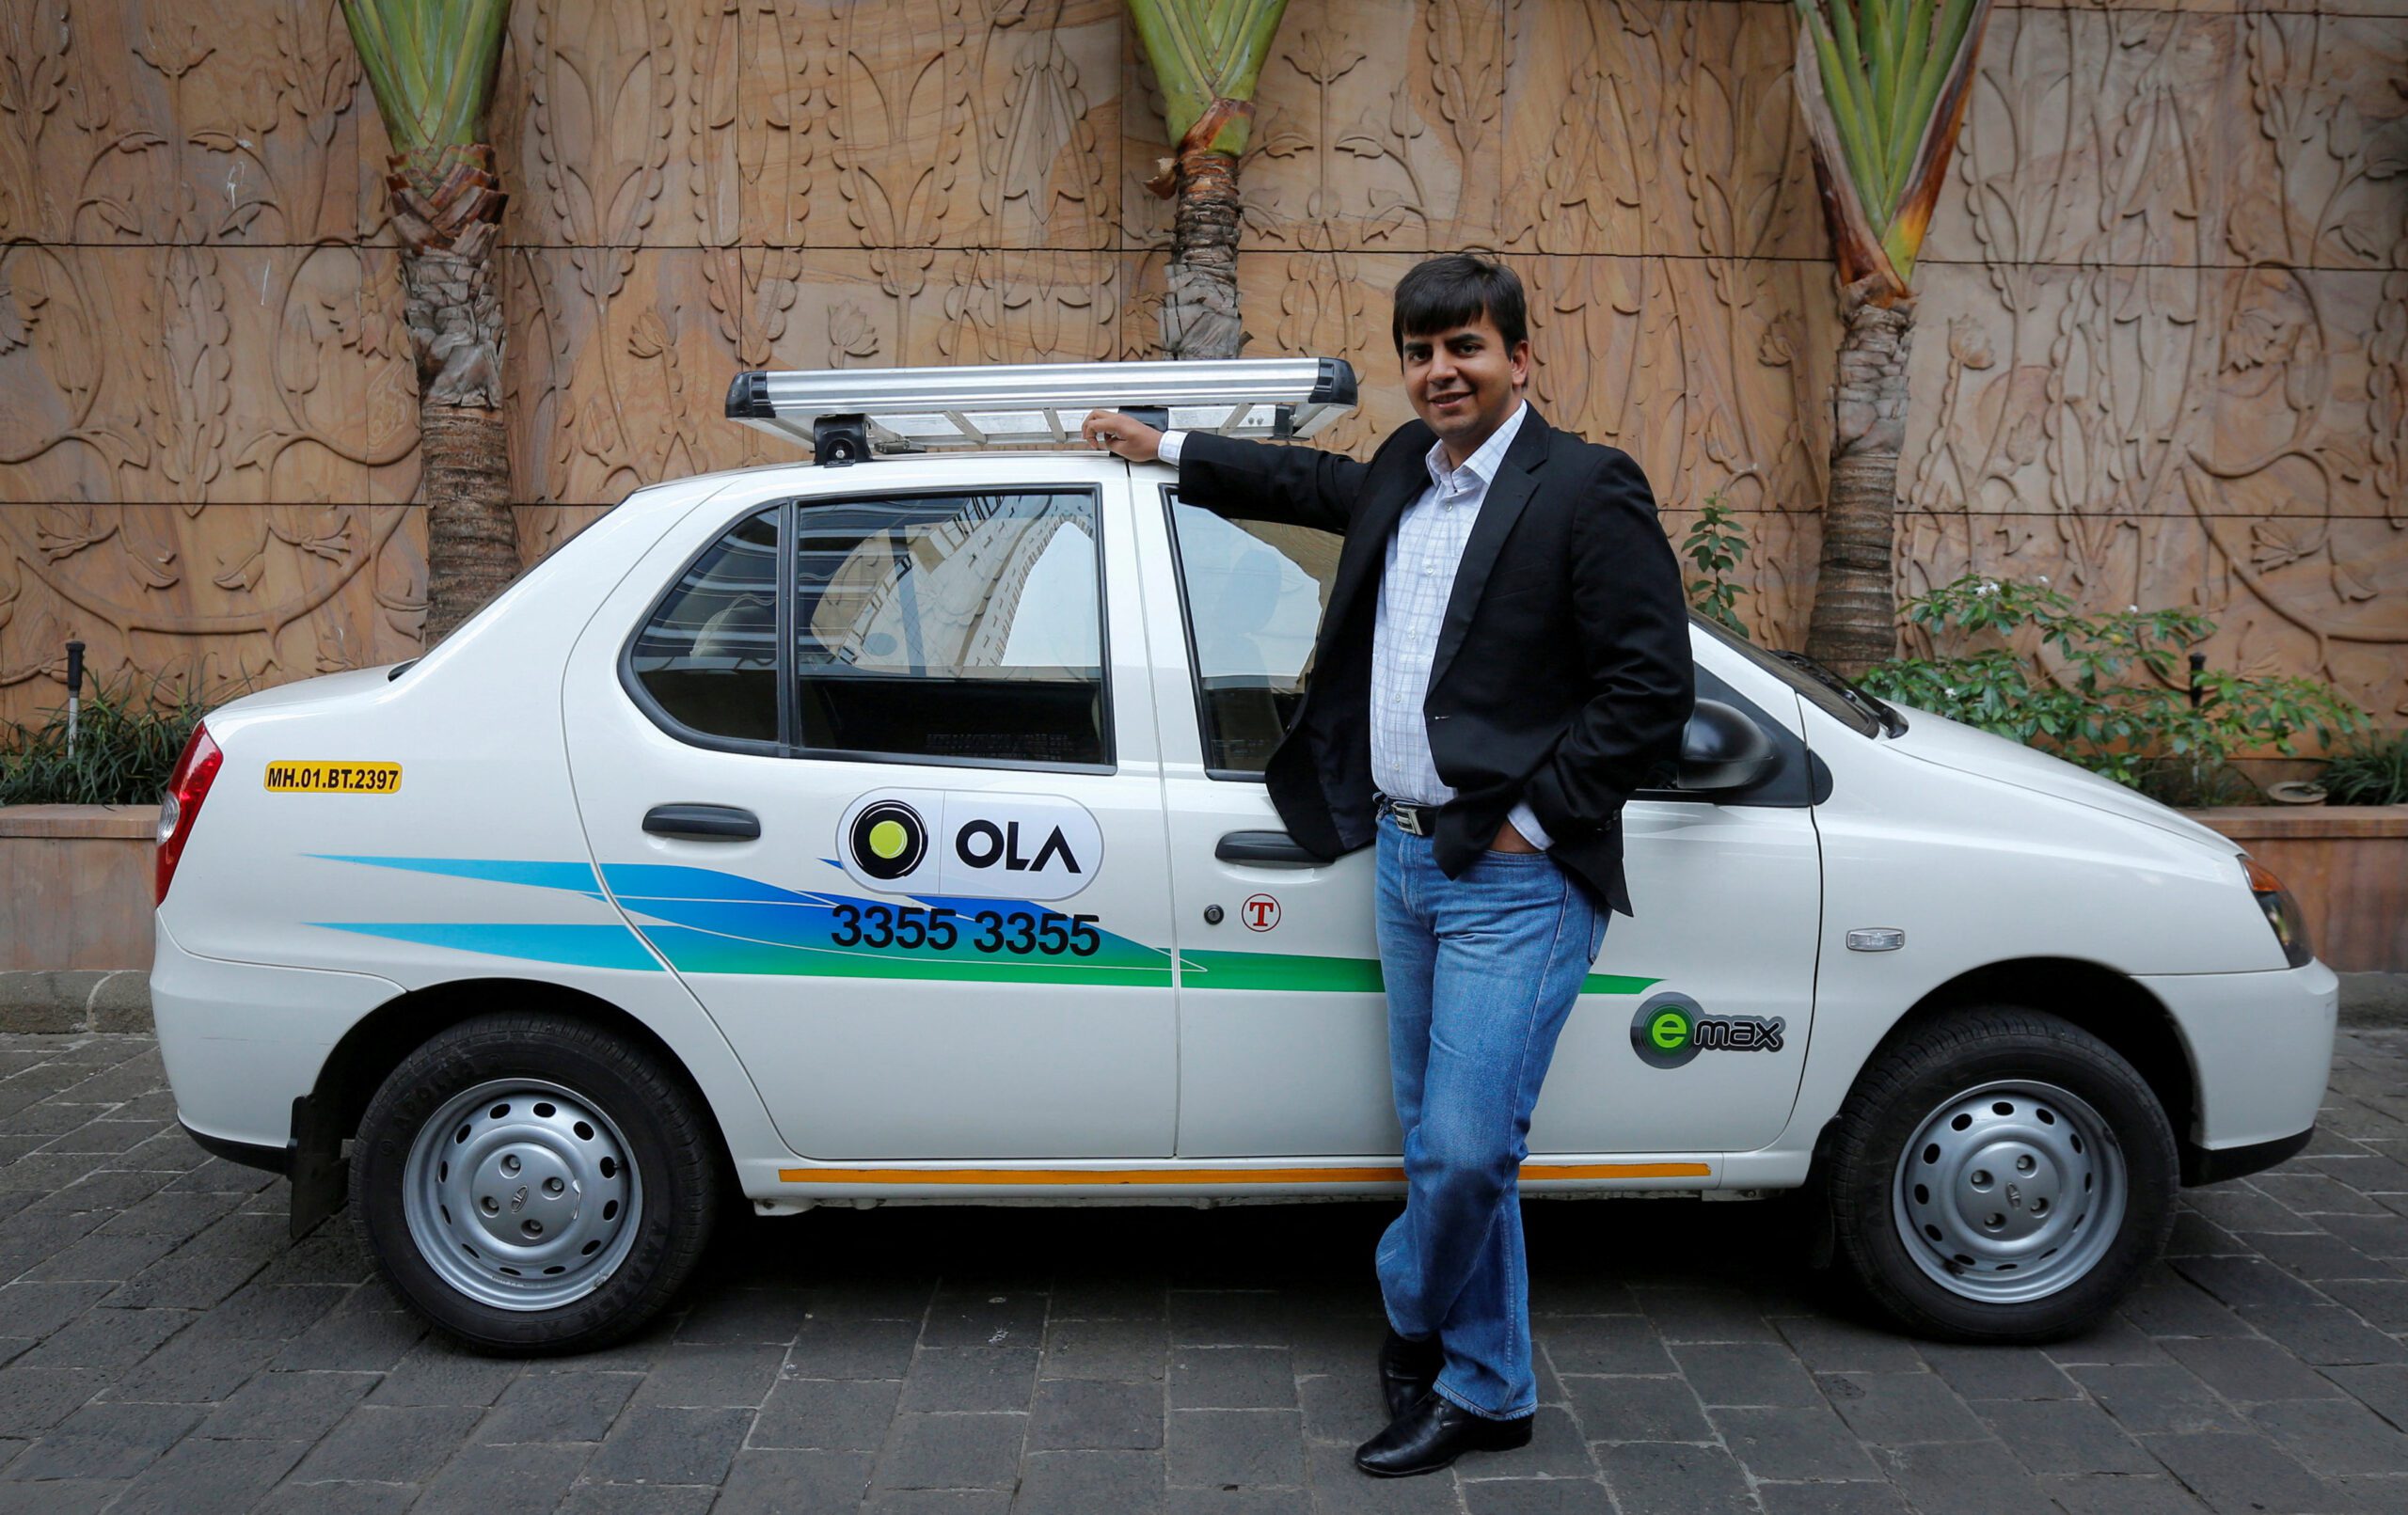 FILE PHOTO: Bhavish Aggarwal, CEO and co-founder of Ola, an app-based cab service provider, poses in front of an Ola cab in Mumbai March 3, 2015. REUTERS/Shailesh Andrade/File Photo